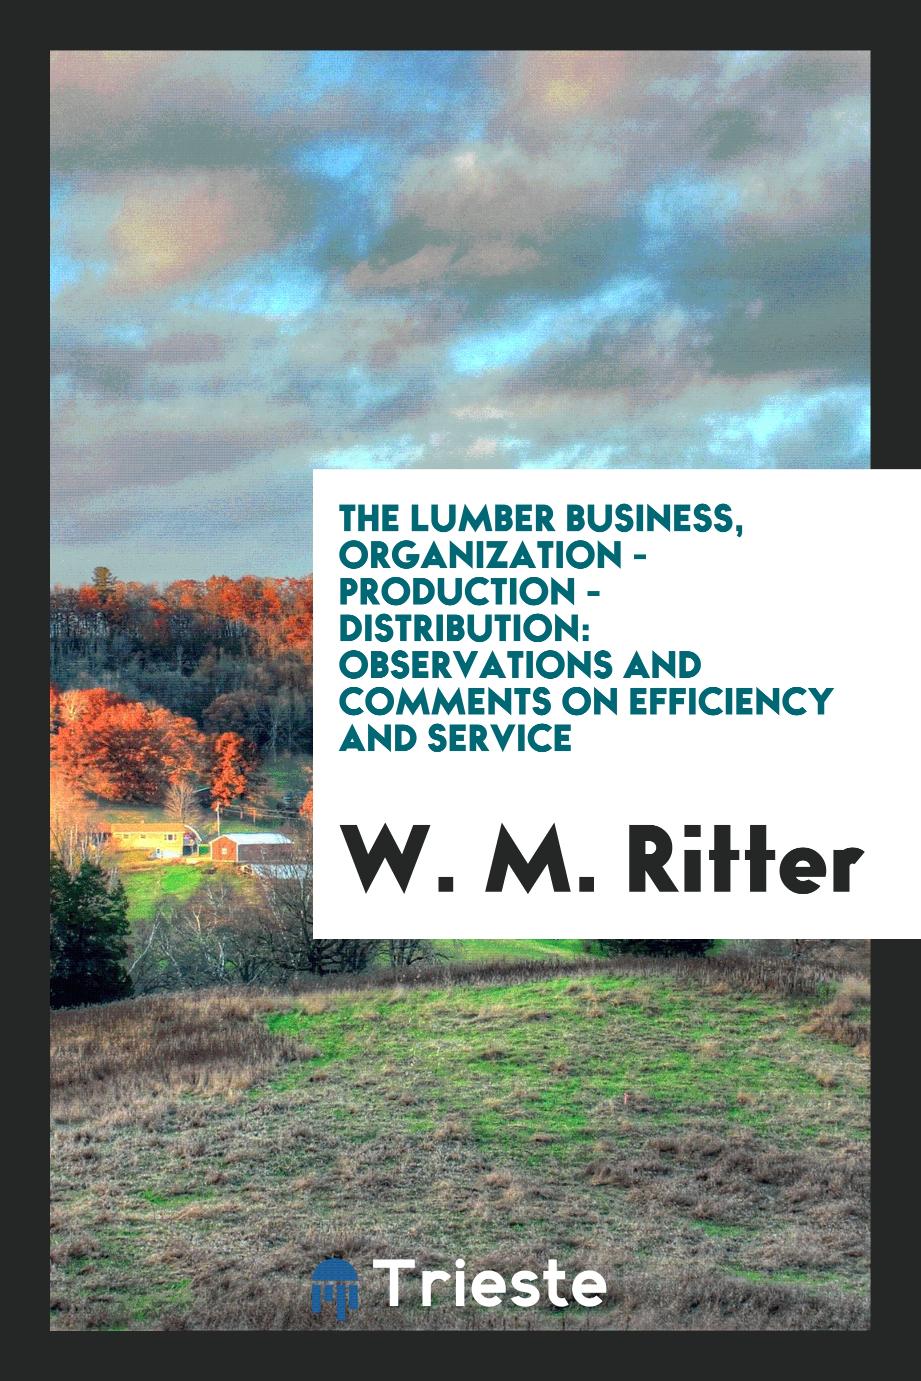 The Lumber Business, Organization - Production - Distribution: Observations and Comments on Efficiency and Service